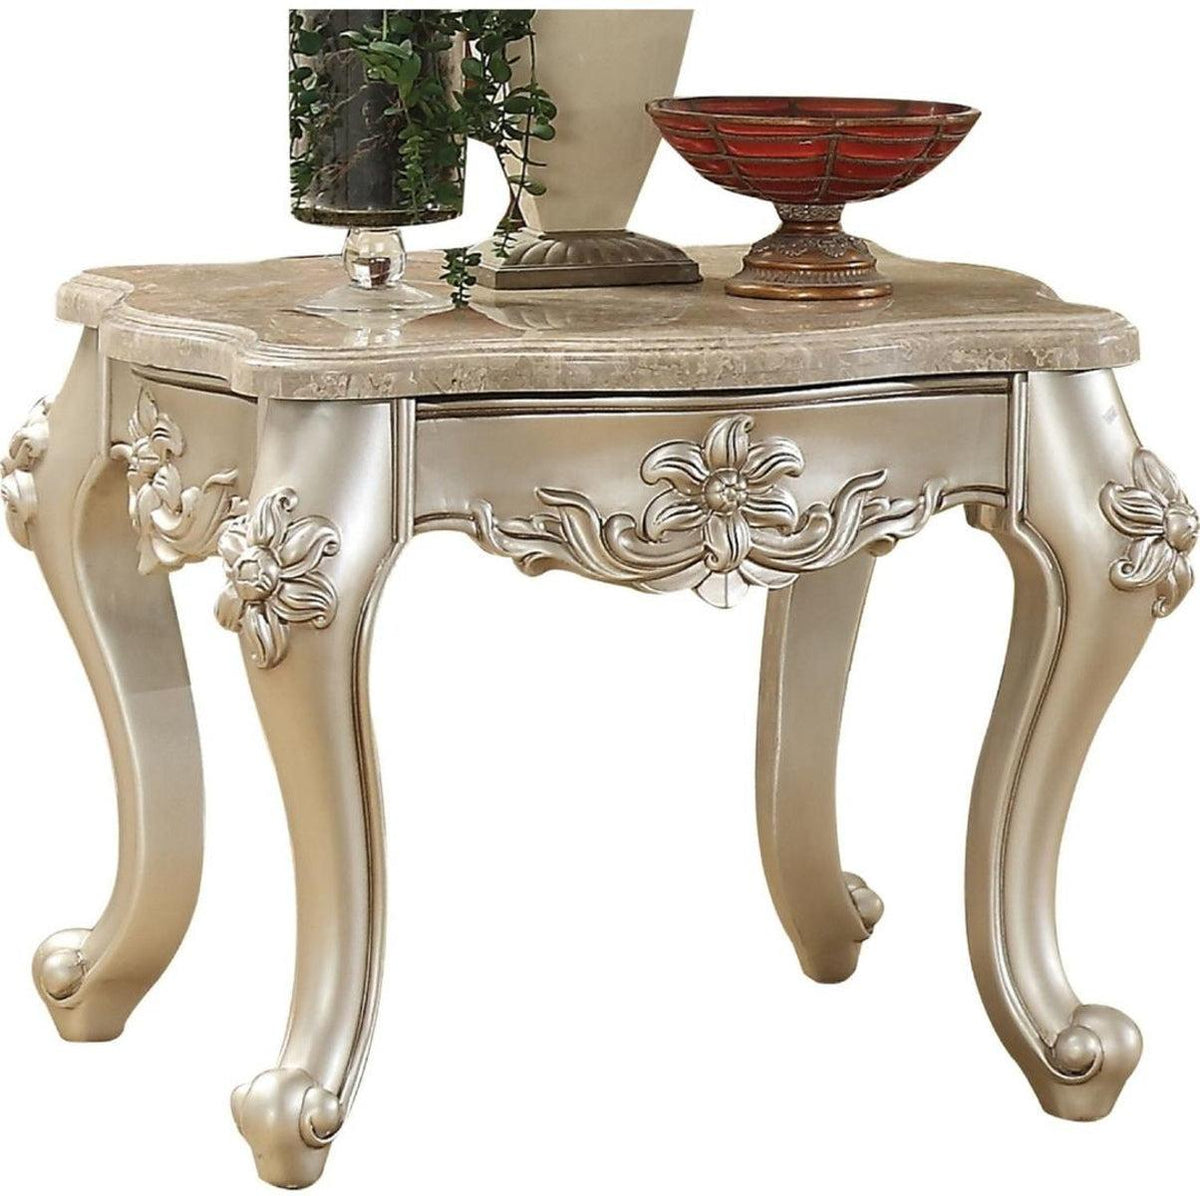 Acme Furniture Bently End Table in Marble/Champagne 81667  Las Vegas Furniture Stores